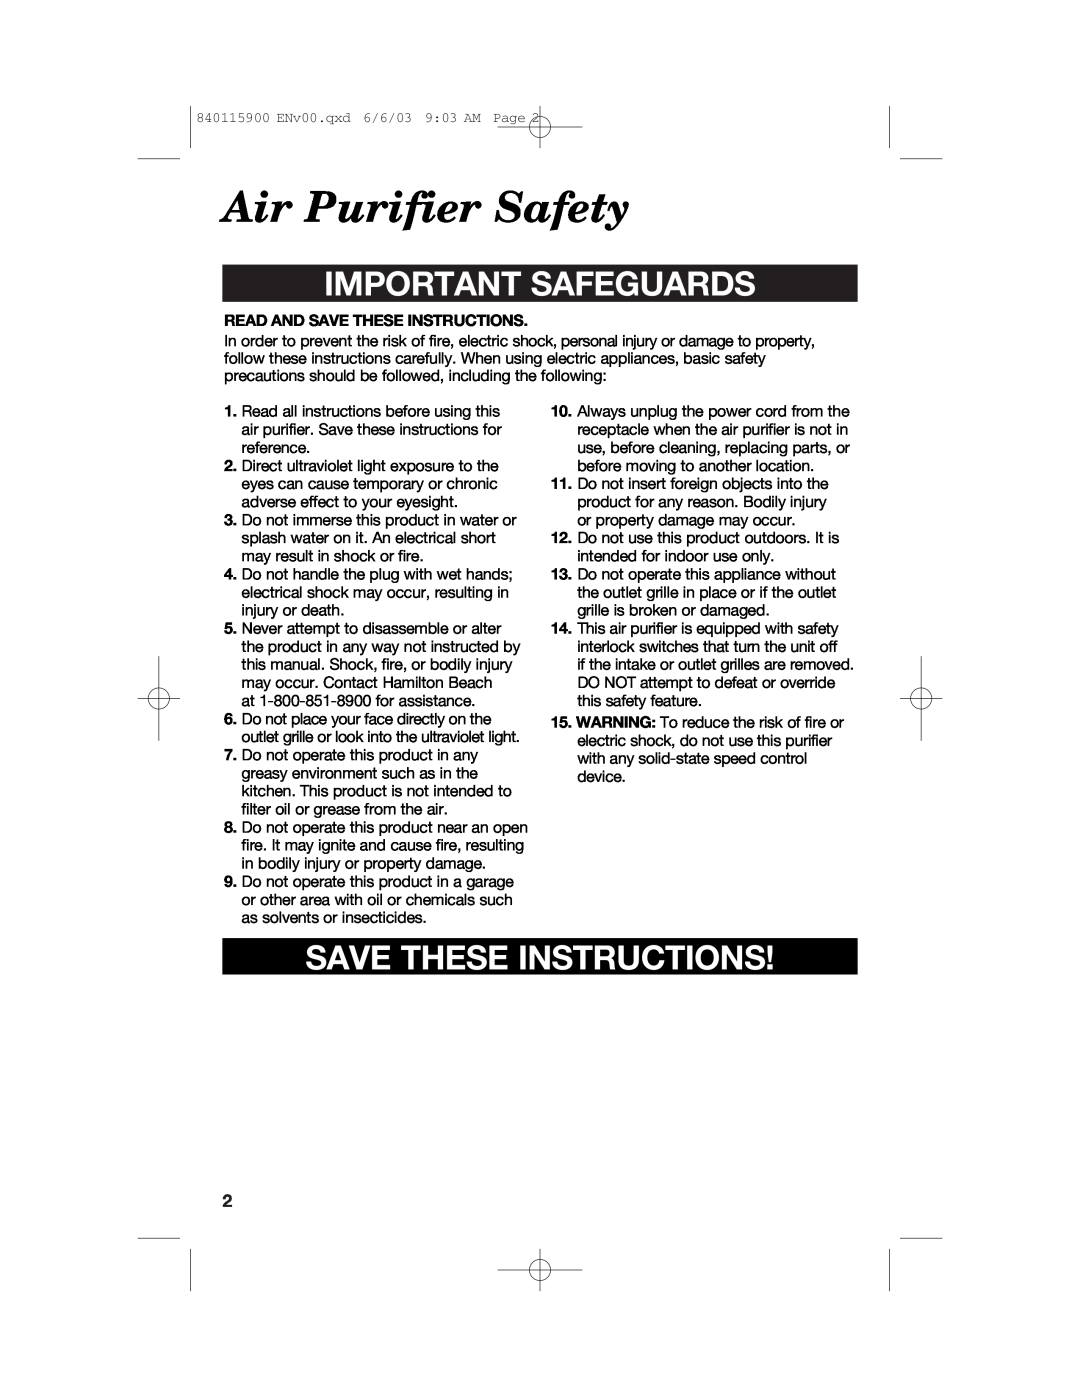 Hamilton Beach 840115900 manual Air Purifier Safety, Important Safeguards, Save These Instructions 